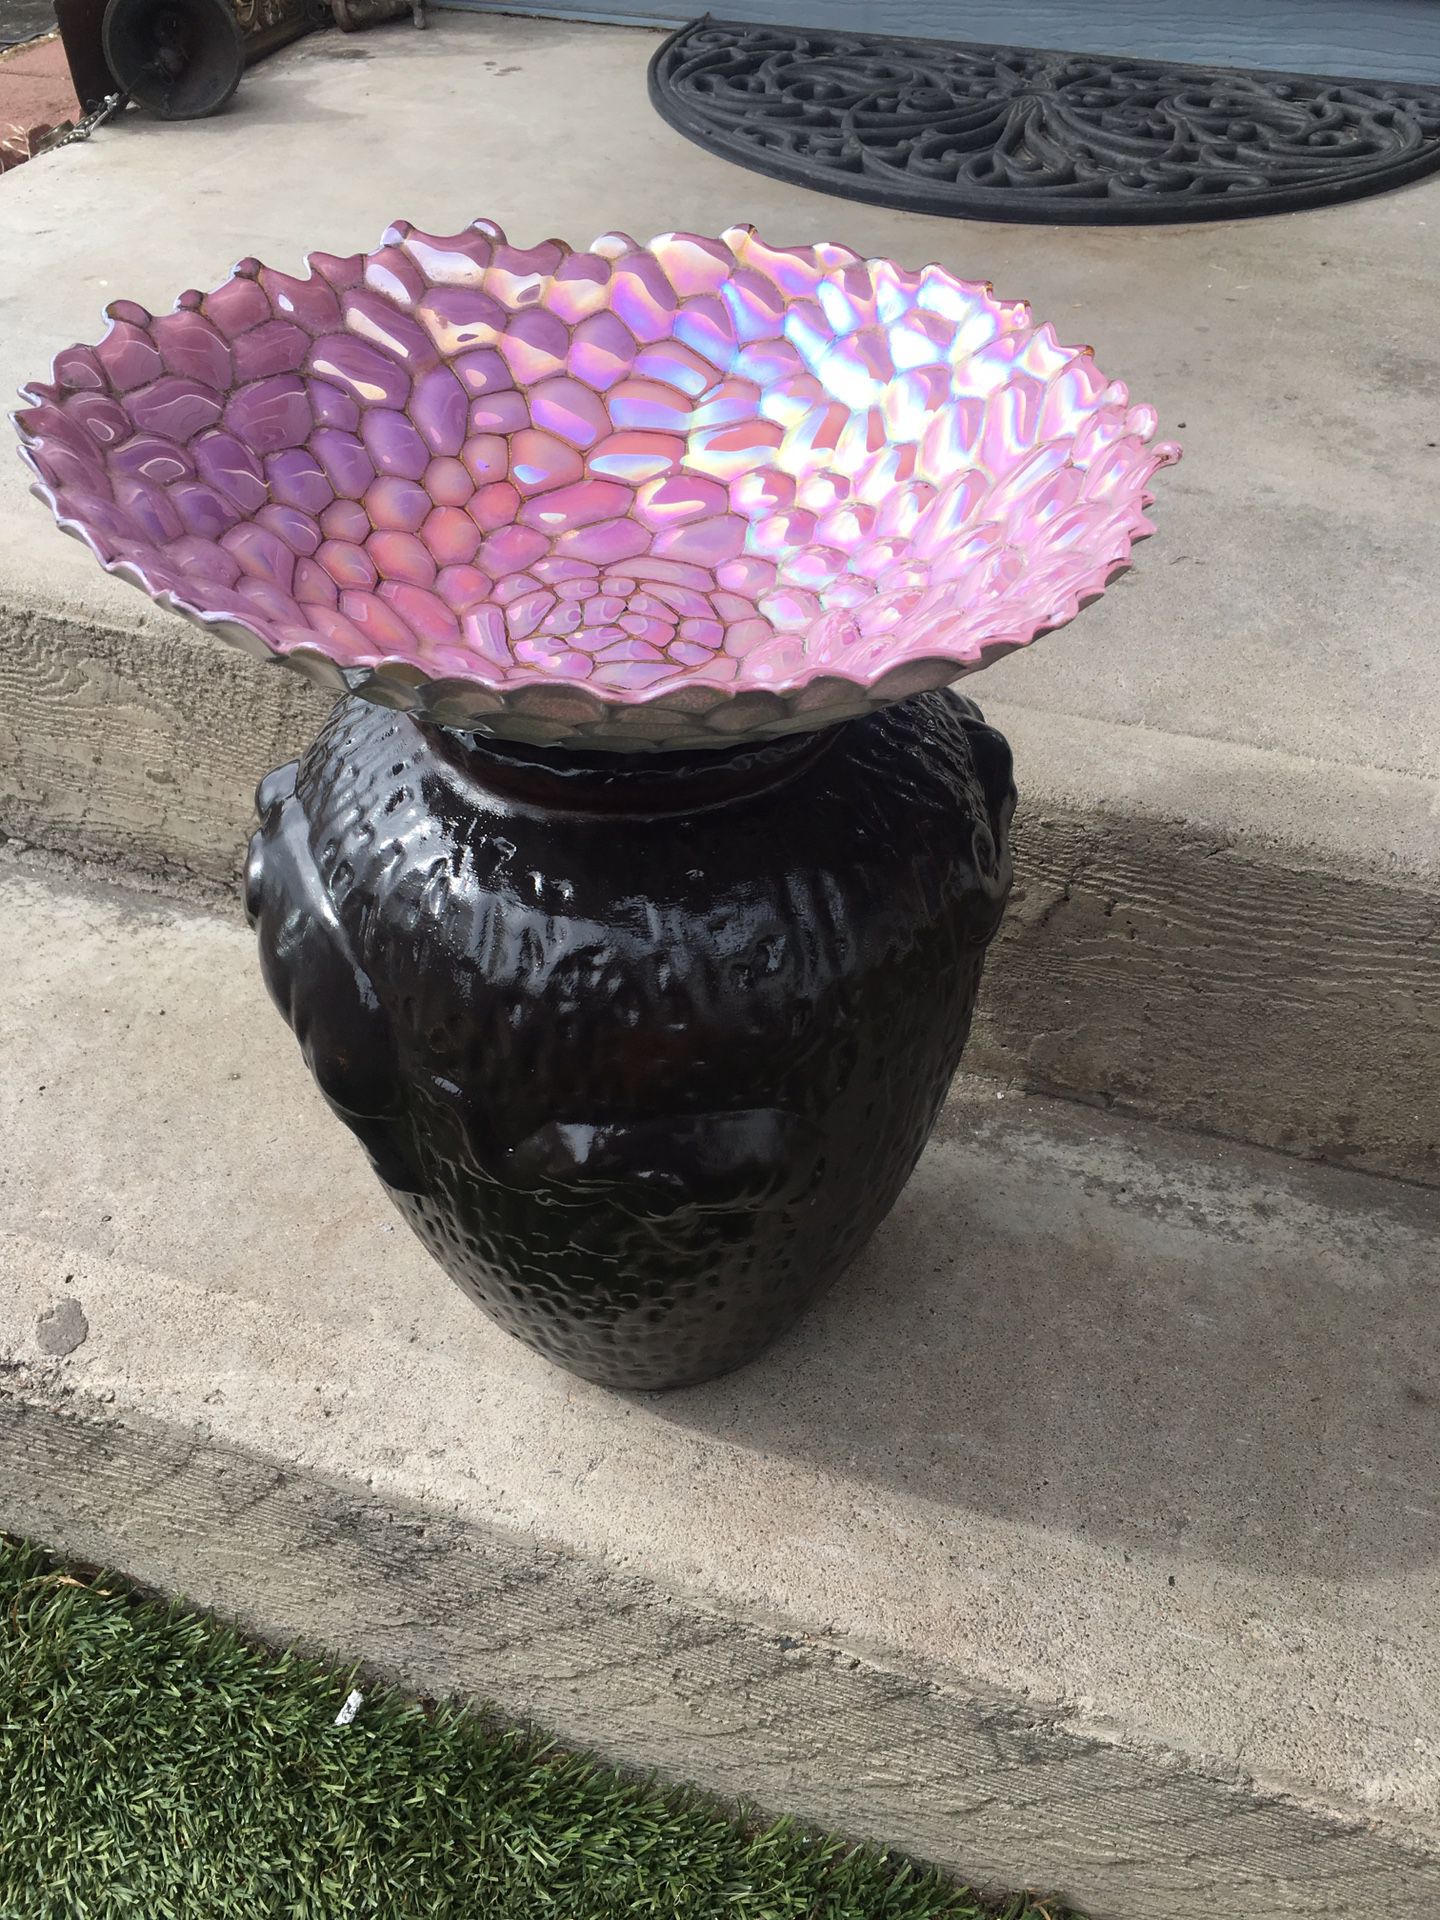 Bird Bath for your Spring Summer Garden! Plum colored bowl with Pottery base. Sweet!